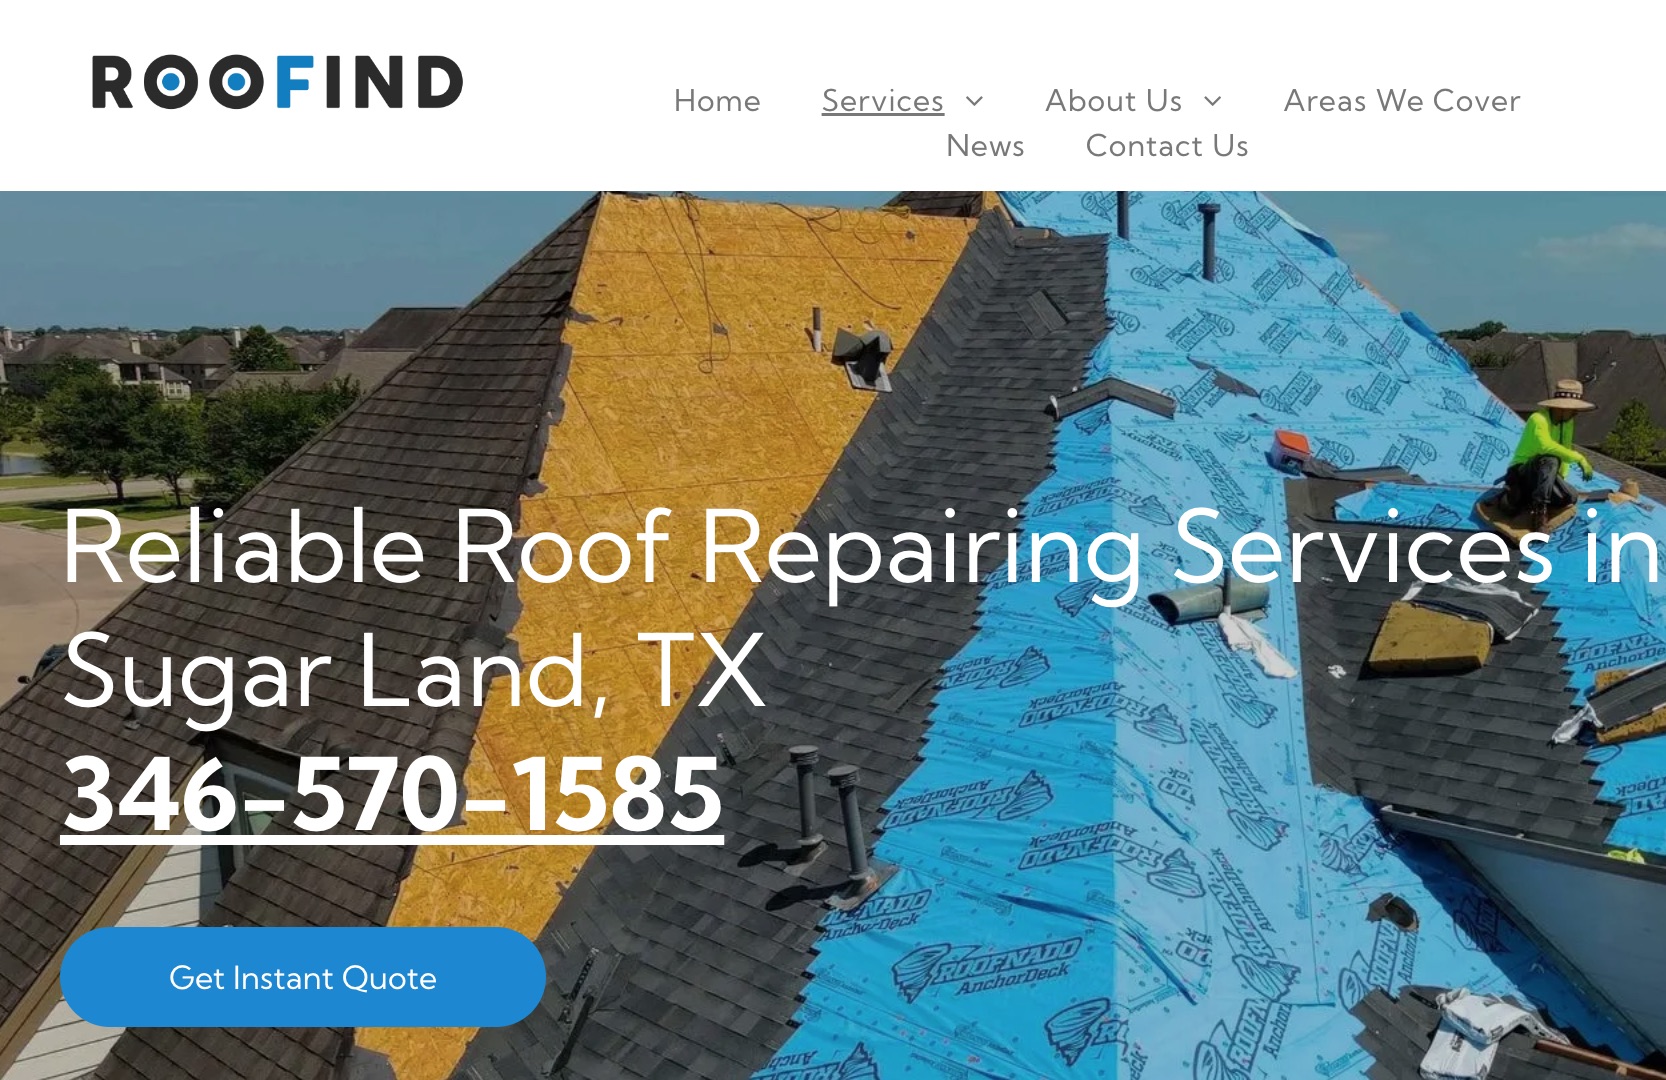 Roofind Mastery: The Houston Roofing Experience Redefined